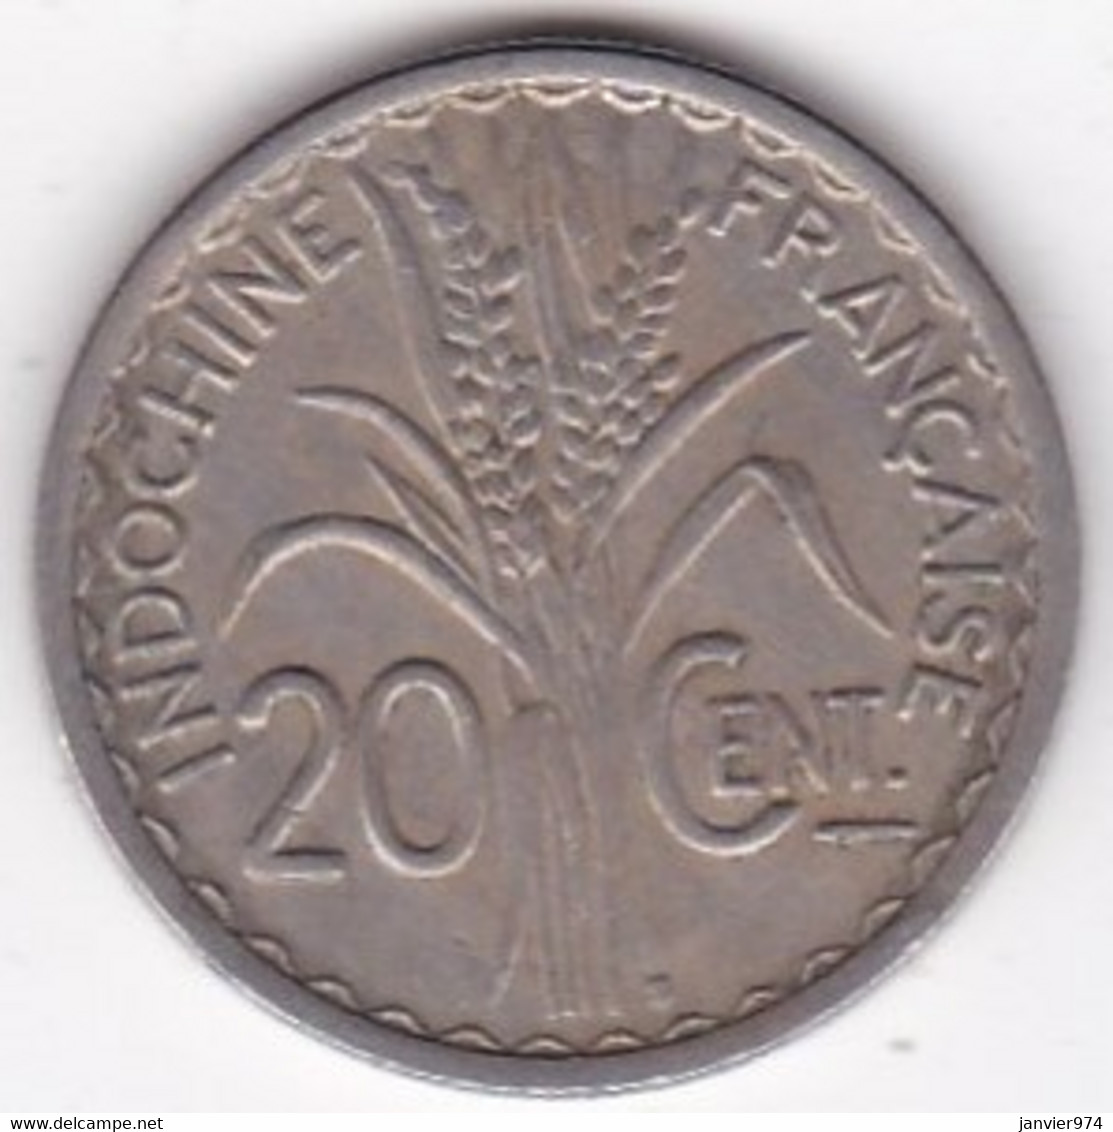 Indochine Française. 20 Cent 1941 S - San Francisco, Non Magnétique, En Cupro Nickel, Lec# 248 - French Indochina